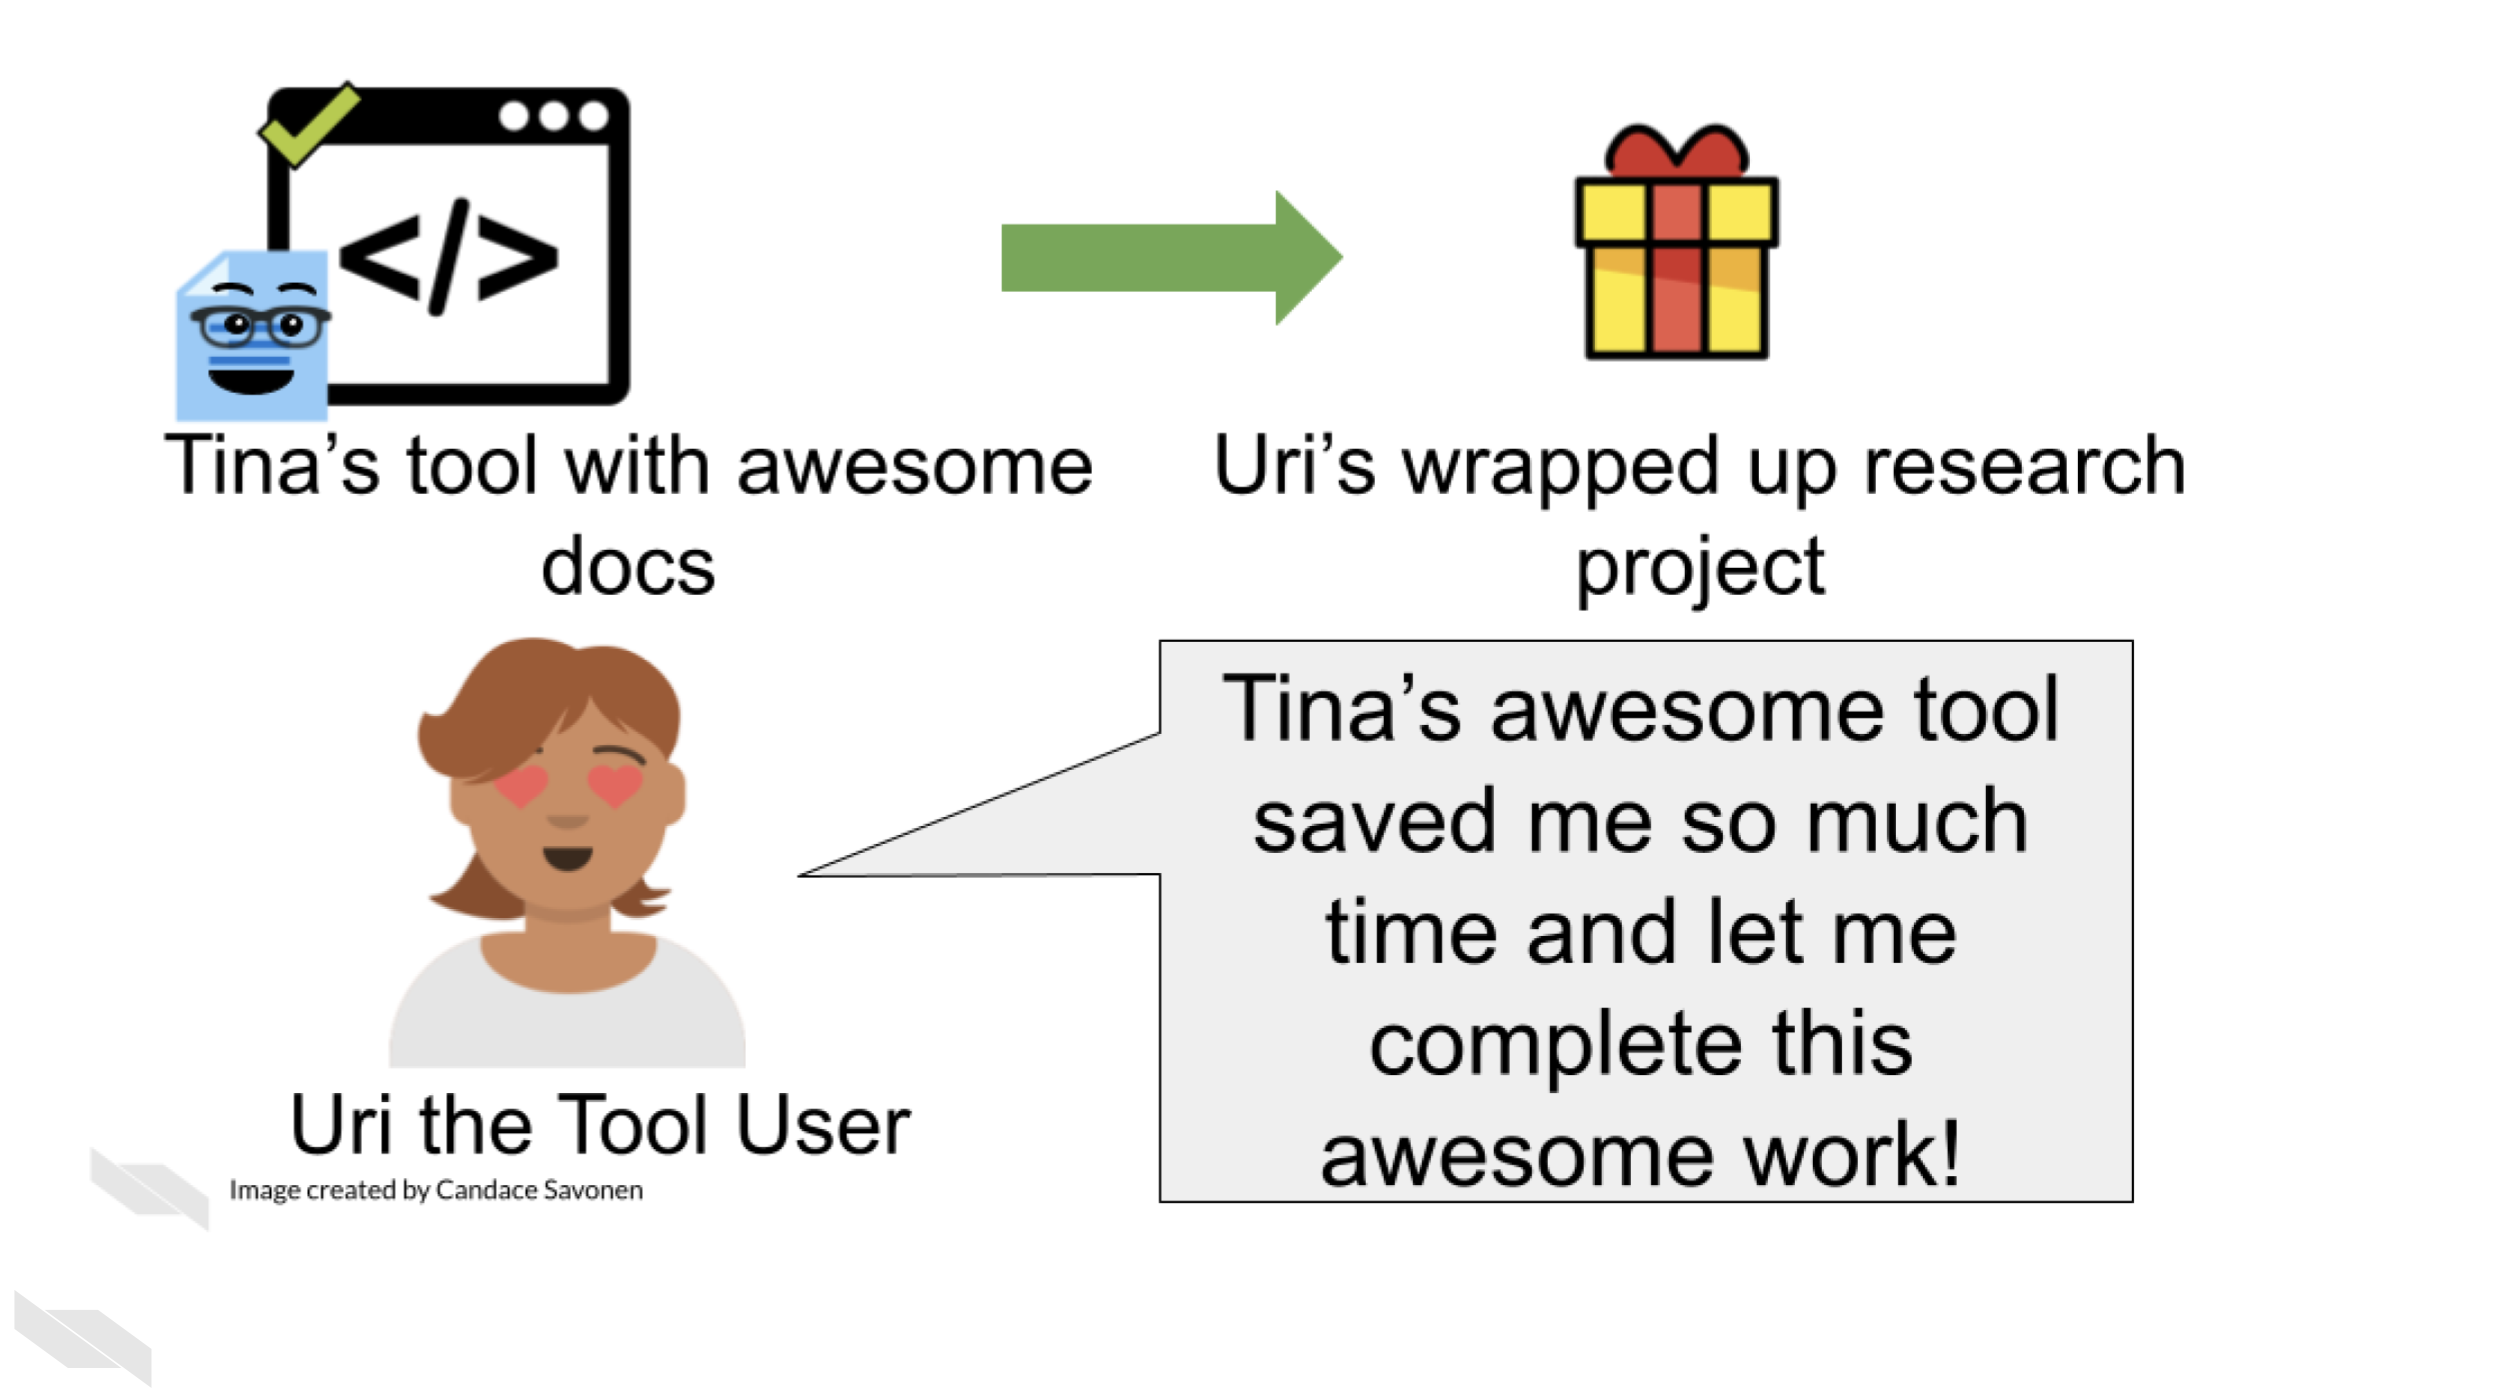 Uri the Tool User is enamored with Tina’s awesome tool that has awesome documentation because it has helped them wrap up their research project that is represented by a wrapped gift. Uri the Tool User says, Tina’s awesome tool saved me so much time and let me complete this awesome work!.